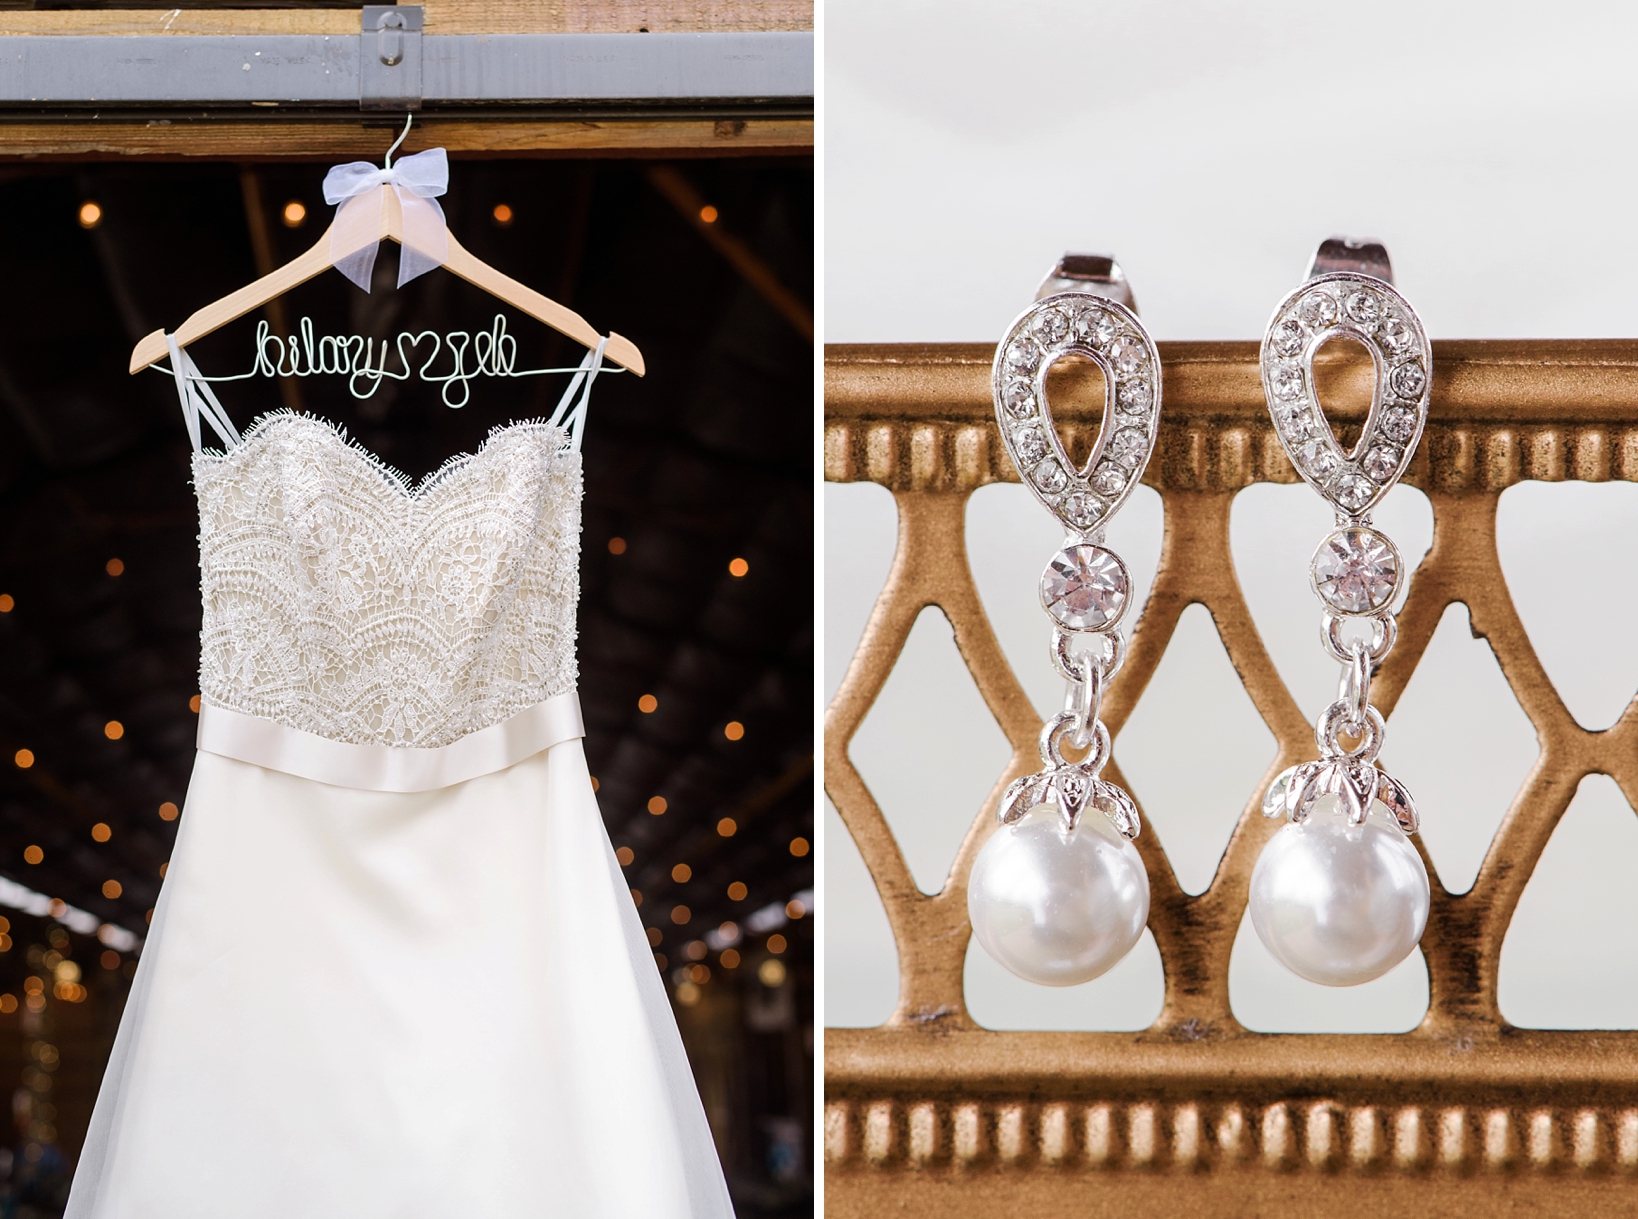 Wedding dress with custom hanger and close up of pearl earrings